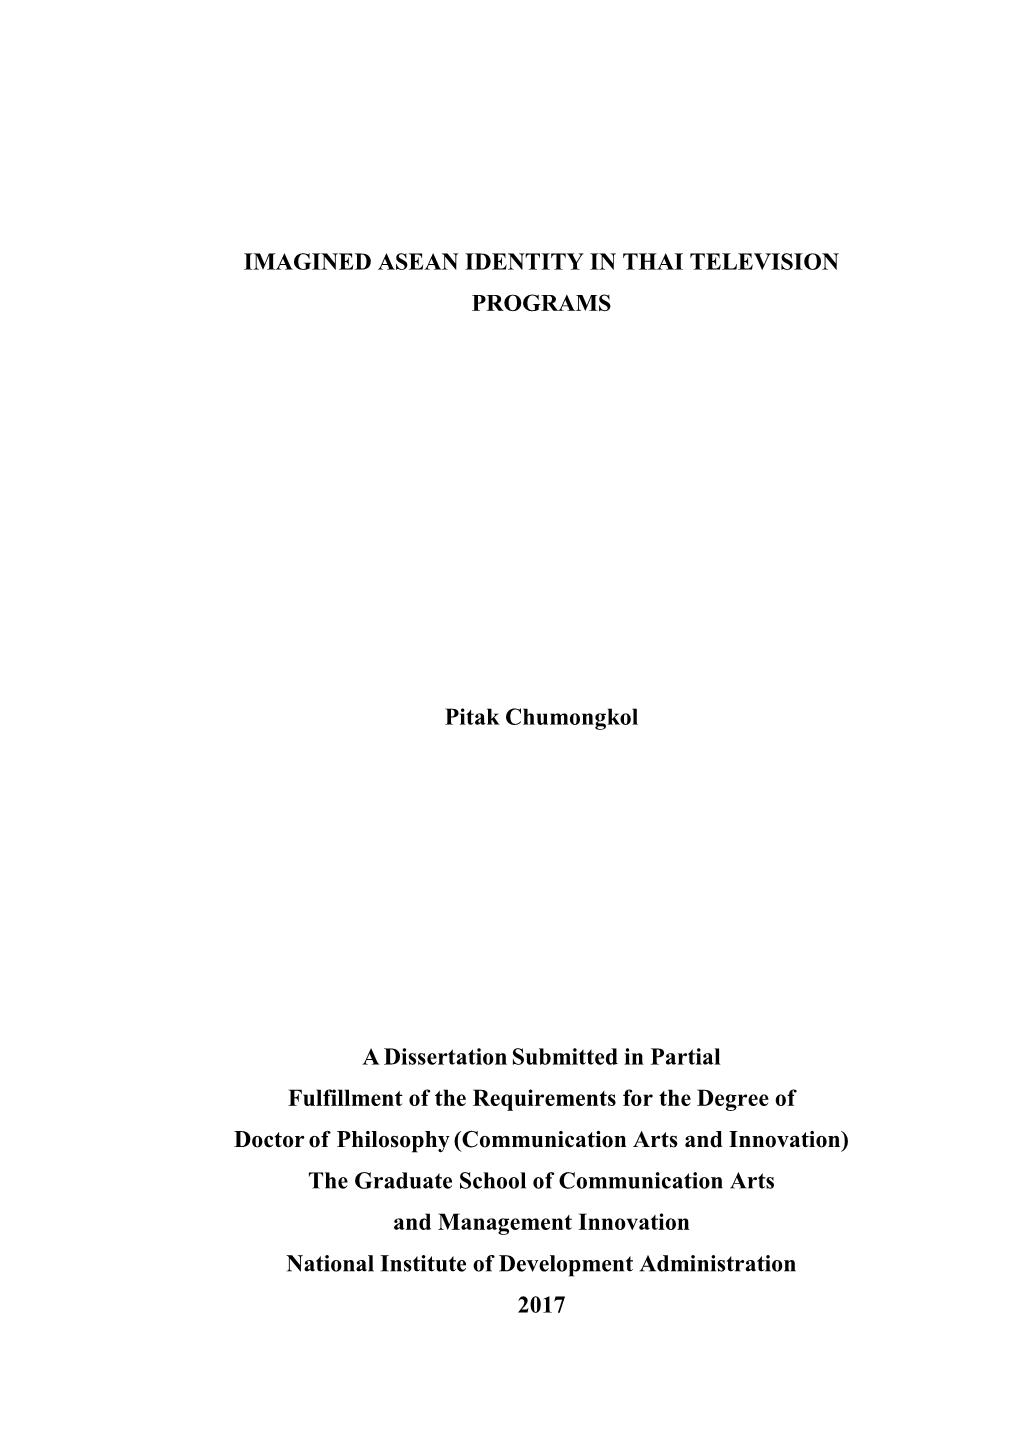 IMAGINED ASEAN IDENTITY in THAI TELEVISION PROGRAMS Pitak Chumongkol a Dissertation Submitted in Partial Fulfillment of the Requ